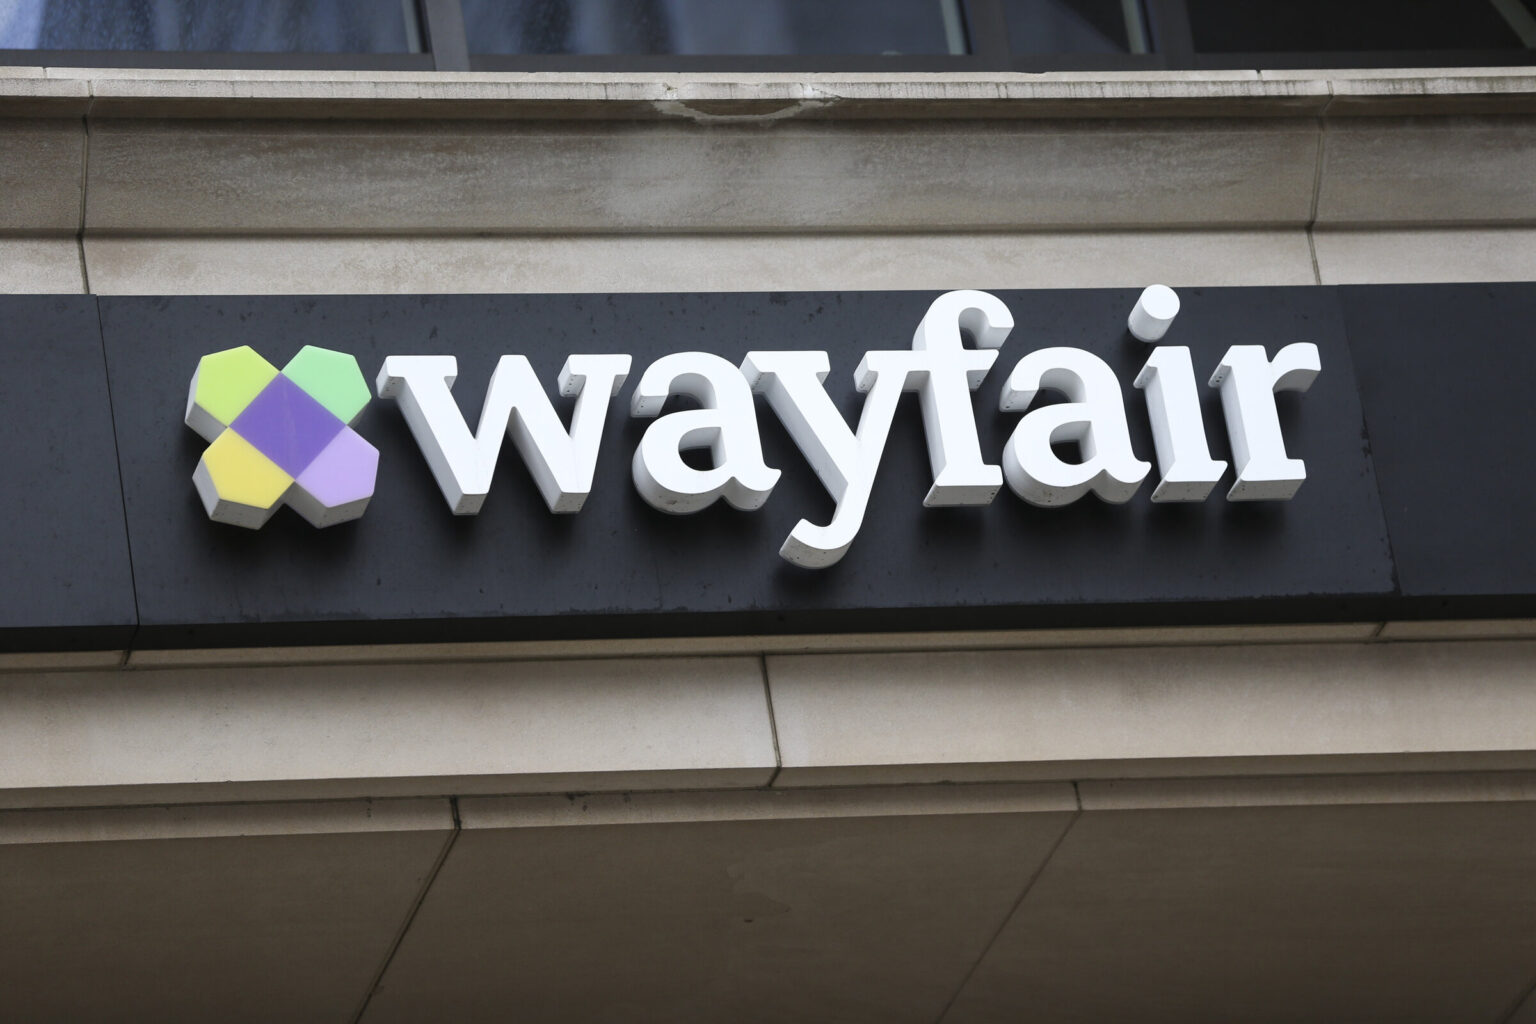 Wayfair started trending on Twitter after a conspiracy started to circulate about its stock. Here's everything you need to know.